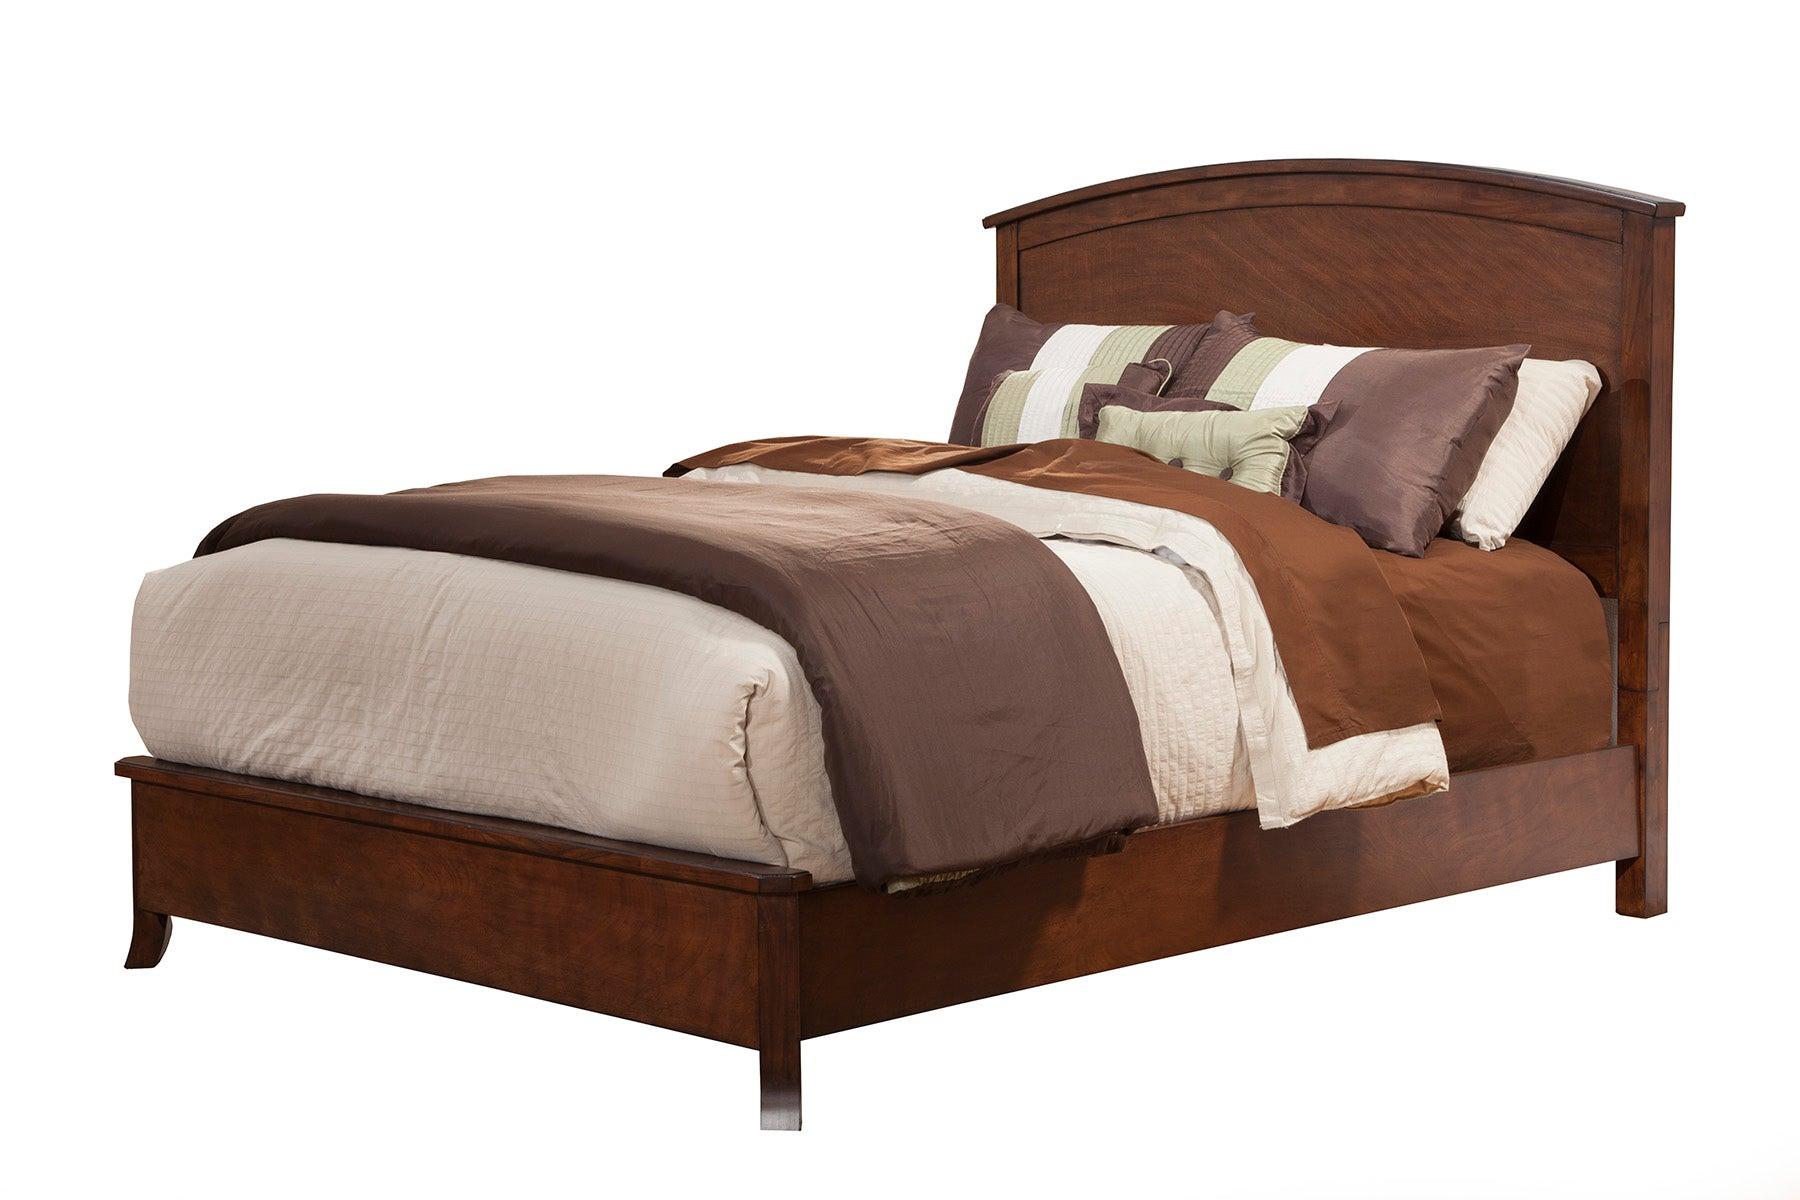 Classic, Traditional Panel Bed BAKER 977-01Q in Mahogany 